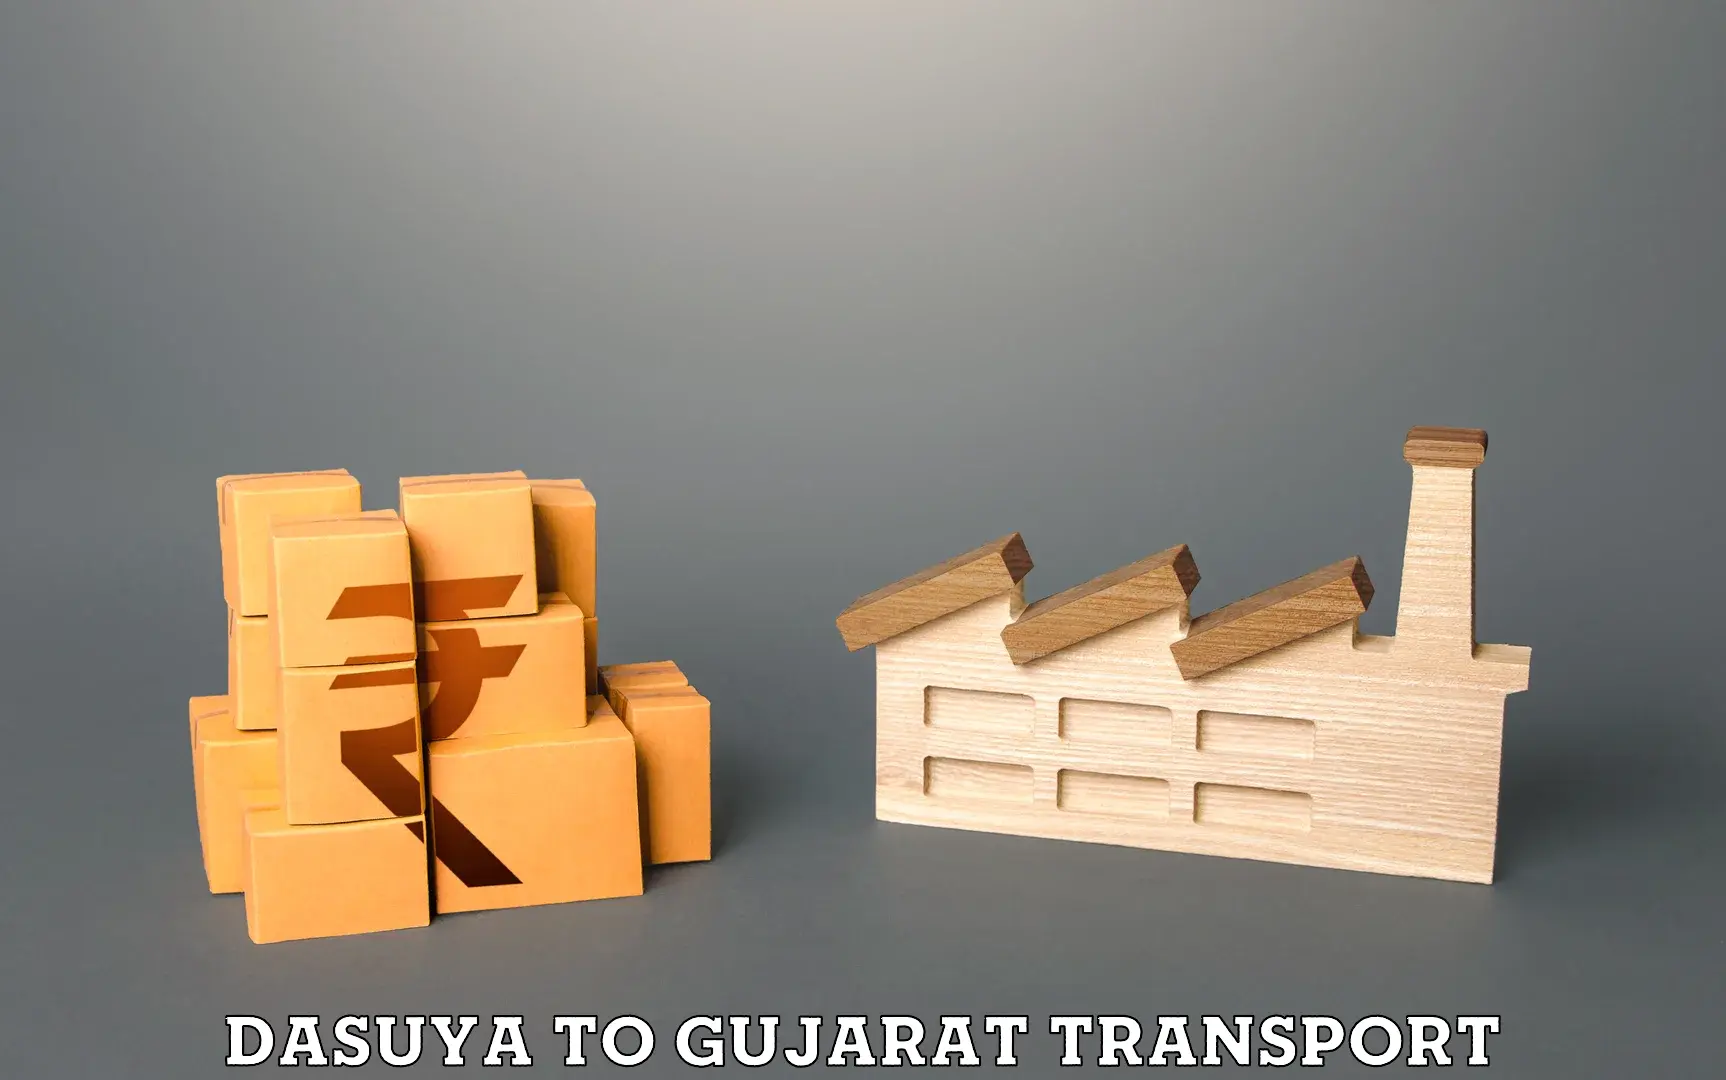 Transport bike from one state to another Dasuya to Gujarat